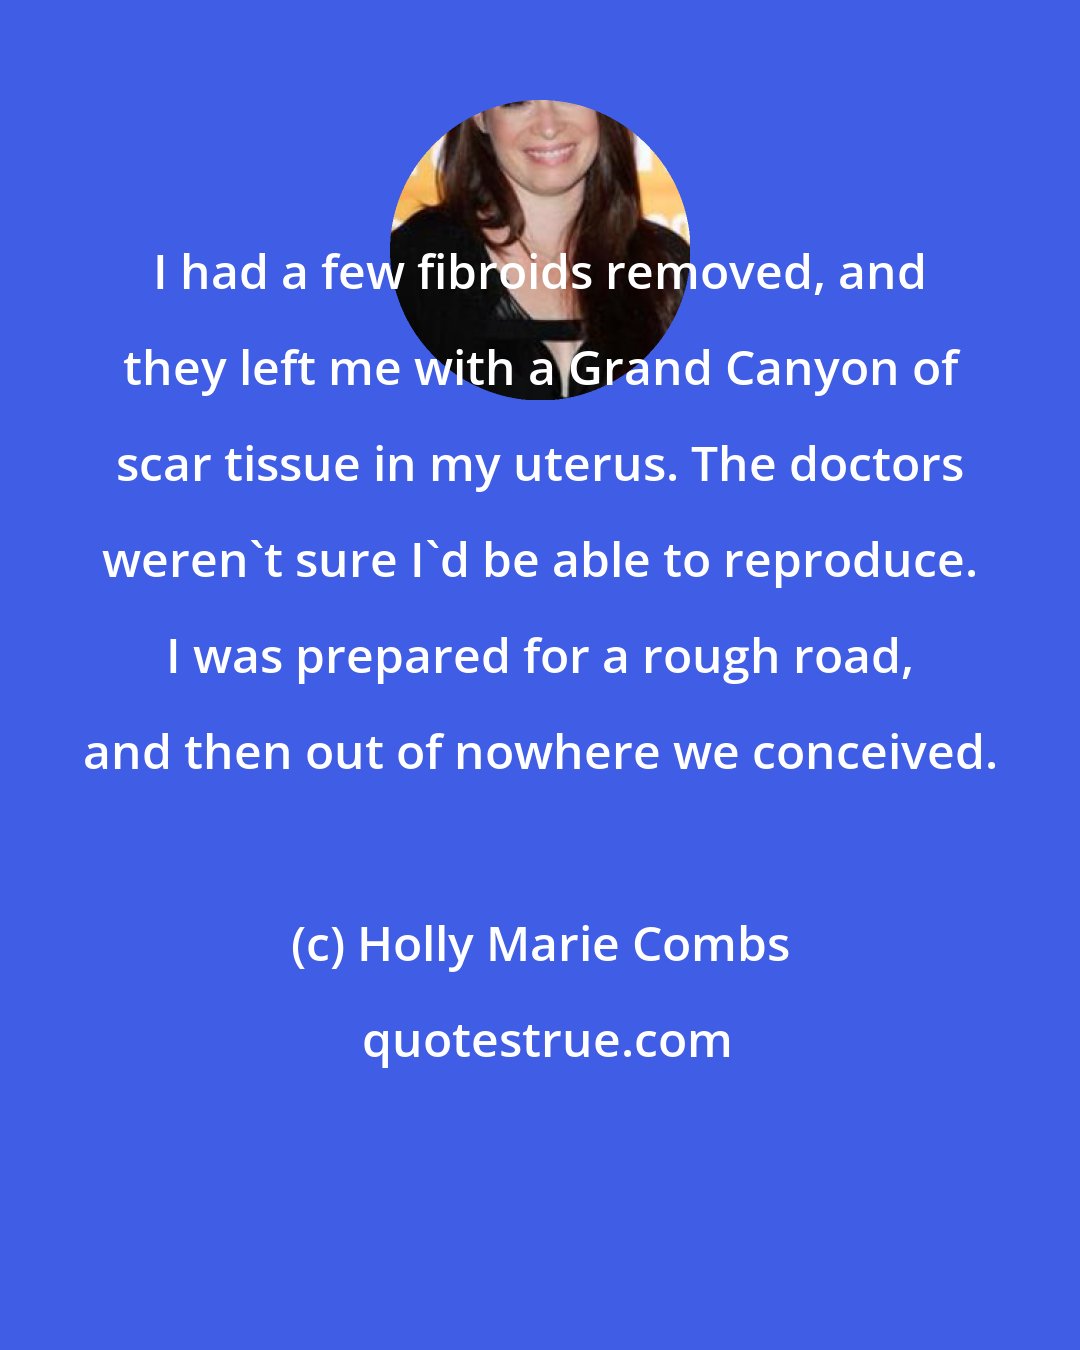 Holly Marie Combs: I had a few fibroids removed, and they left me with a Grand Canyon of scar tissue in my uterus. The doctors weren't sure I'd be able to reproduce. I was prepared for a rough road, and then out of nowhere we conceived.